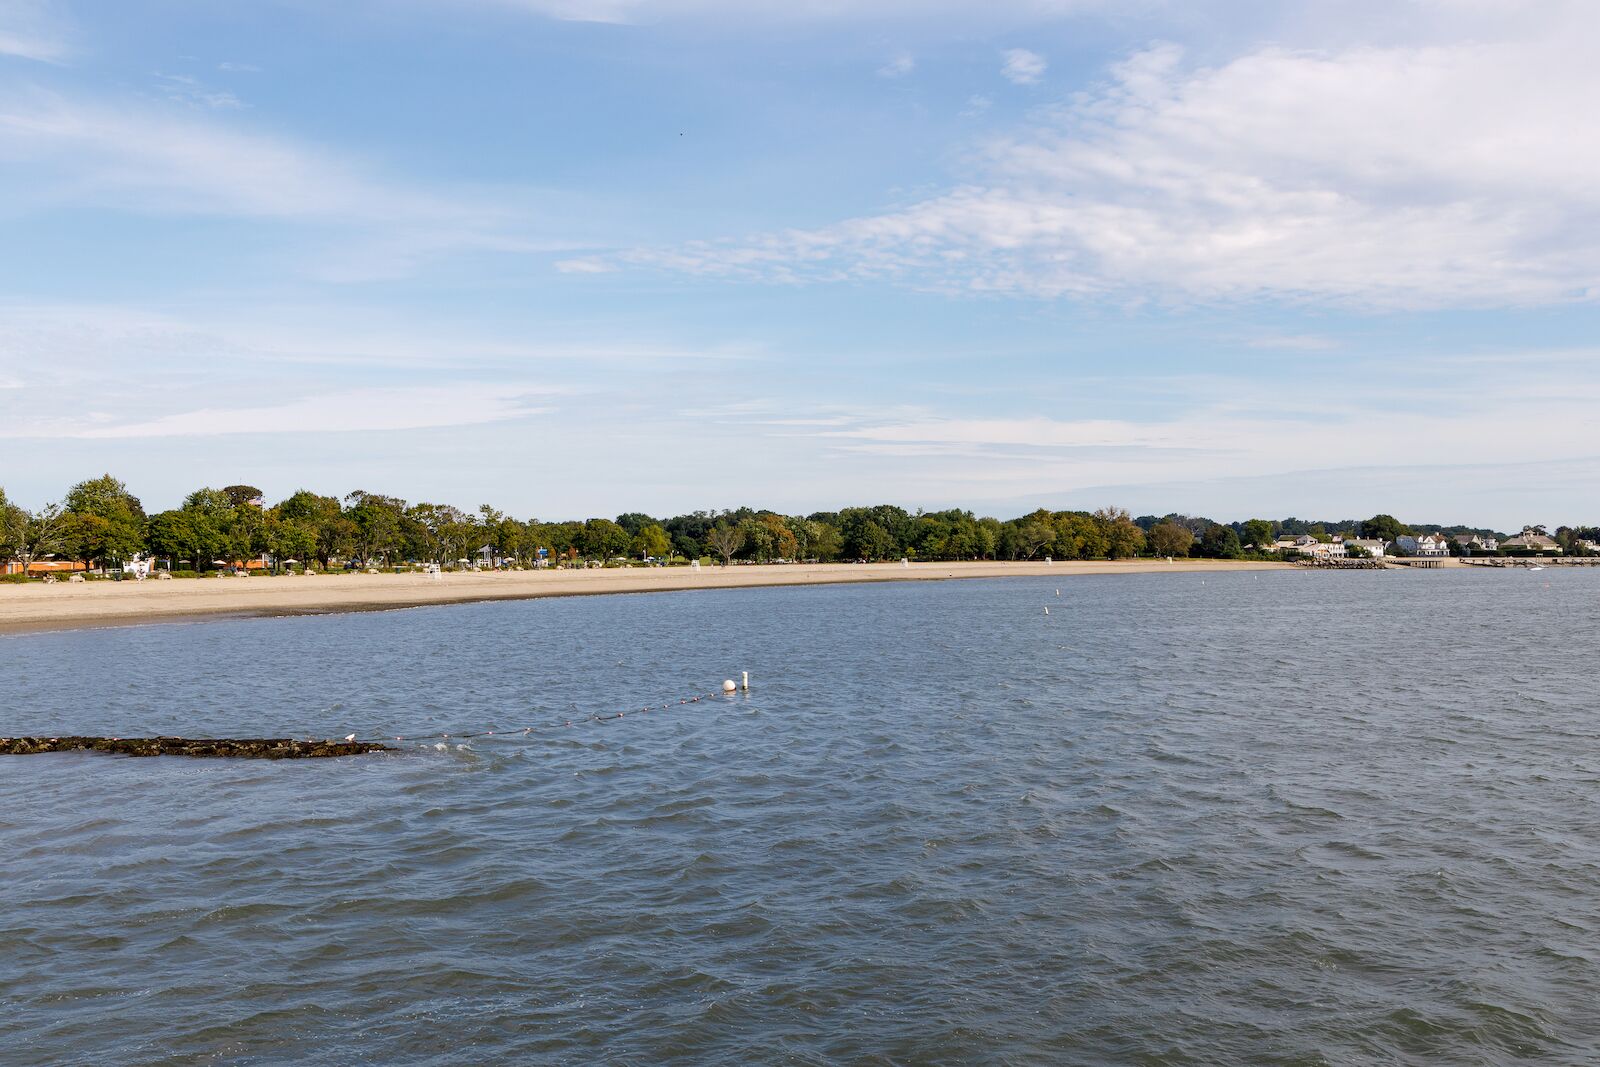 Calf Pasture Beach in Norwalk, Connecticut, as seen from off shore